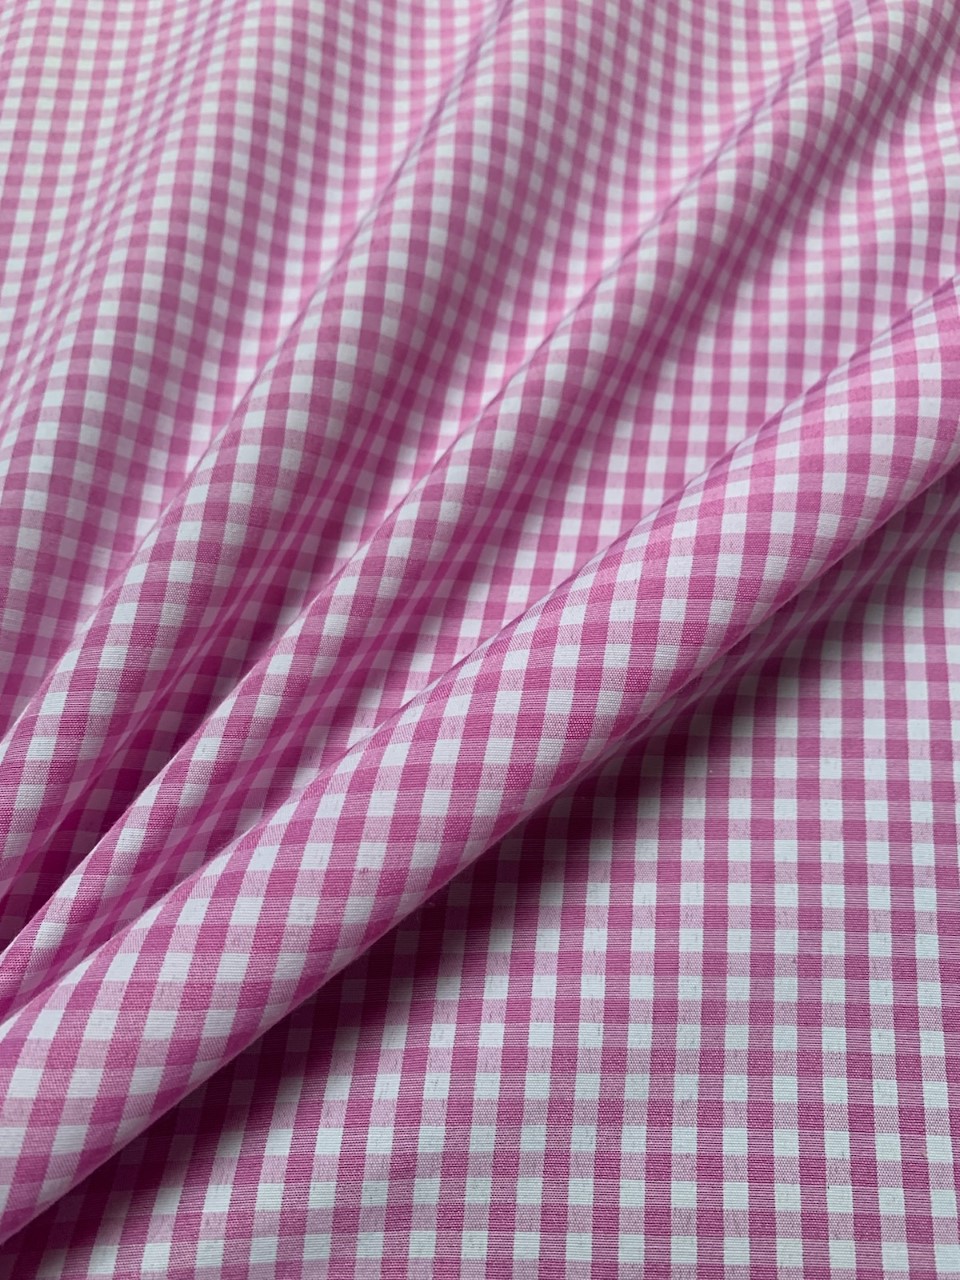 1/8" Pink Gingham Fabric 60" Wide By The Yard Poly Cotton Blend